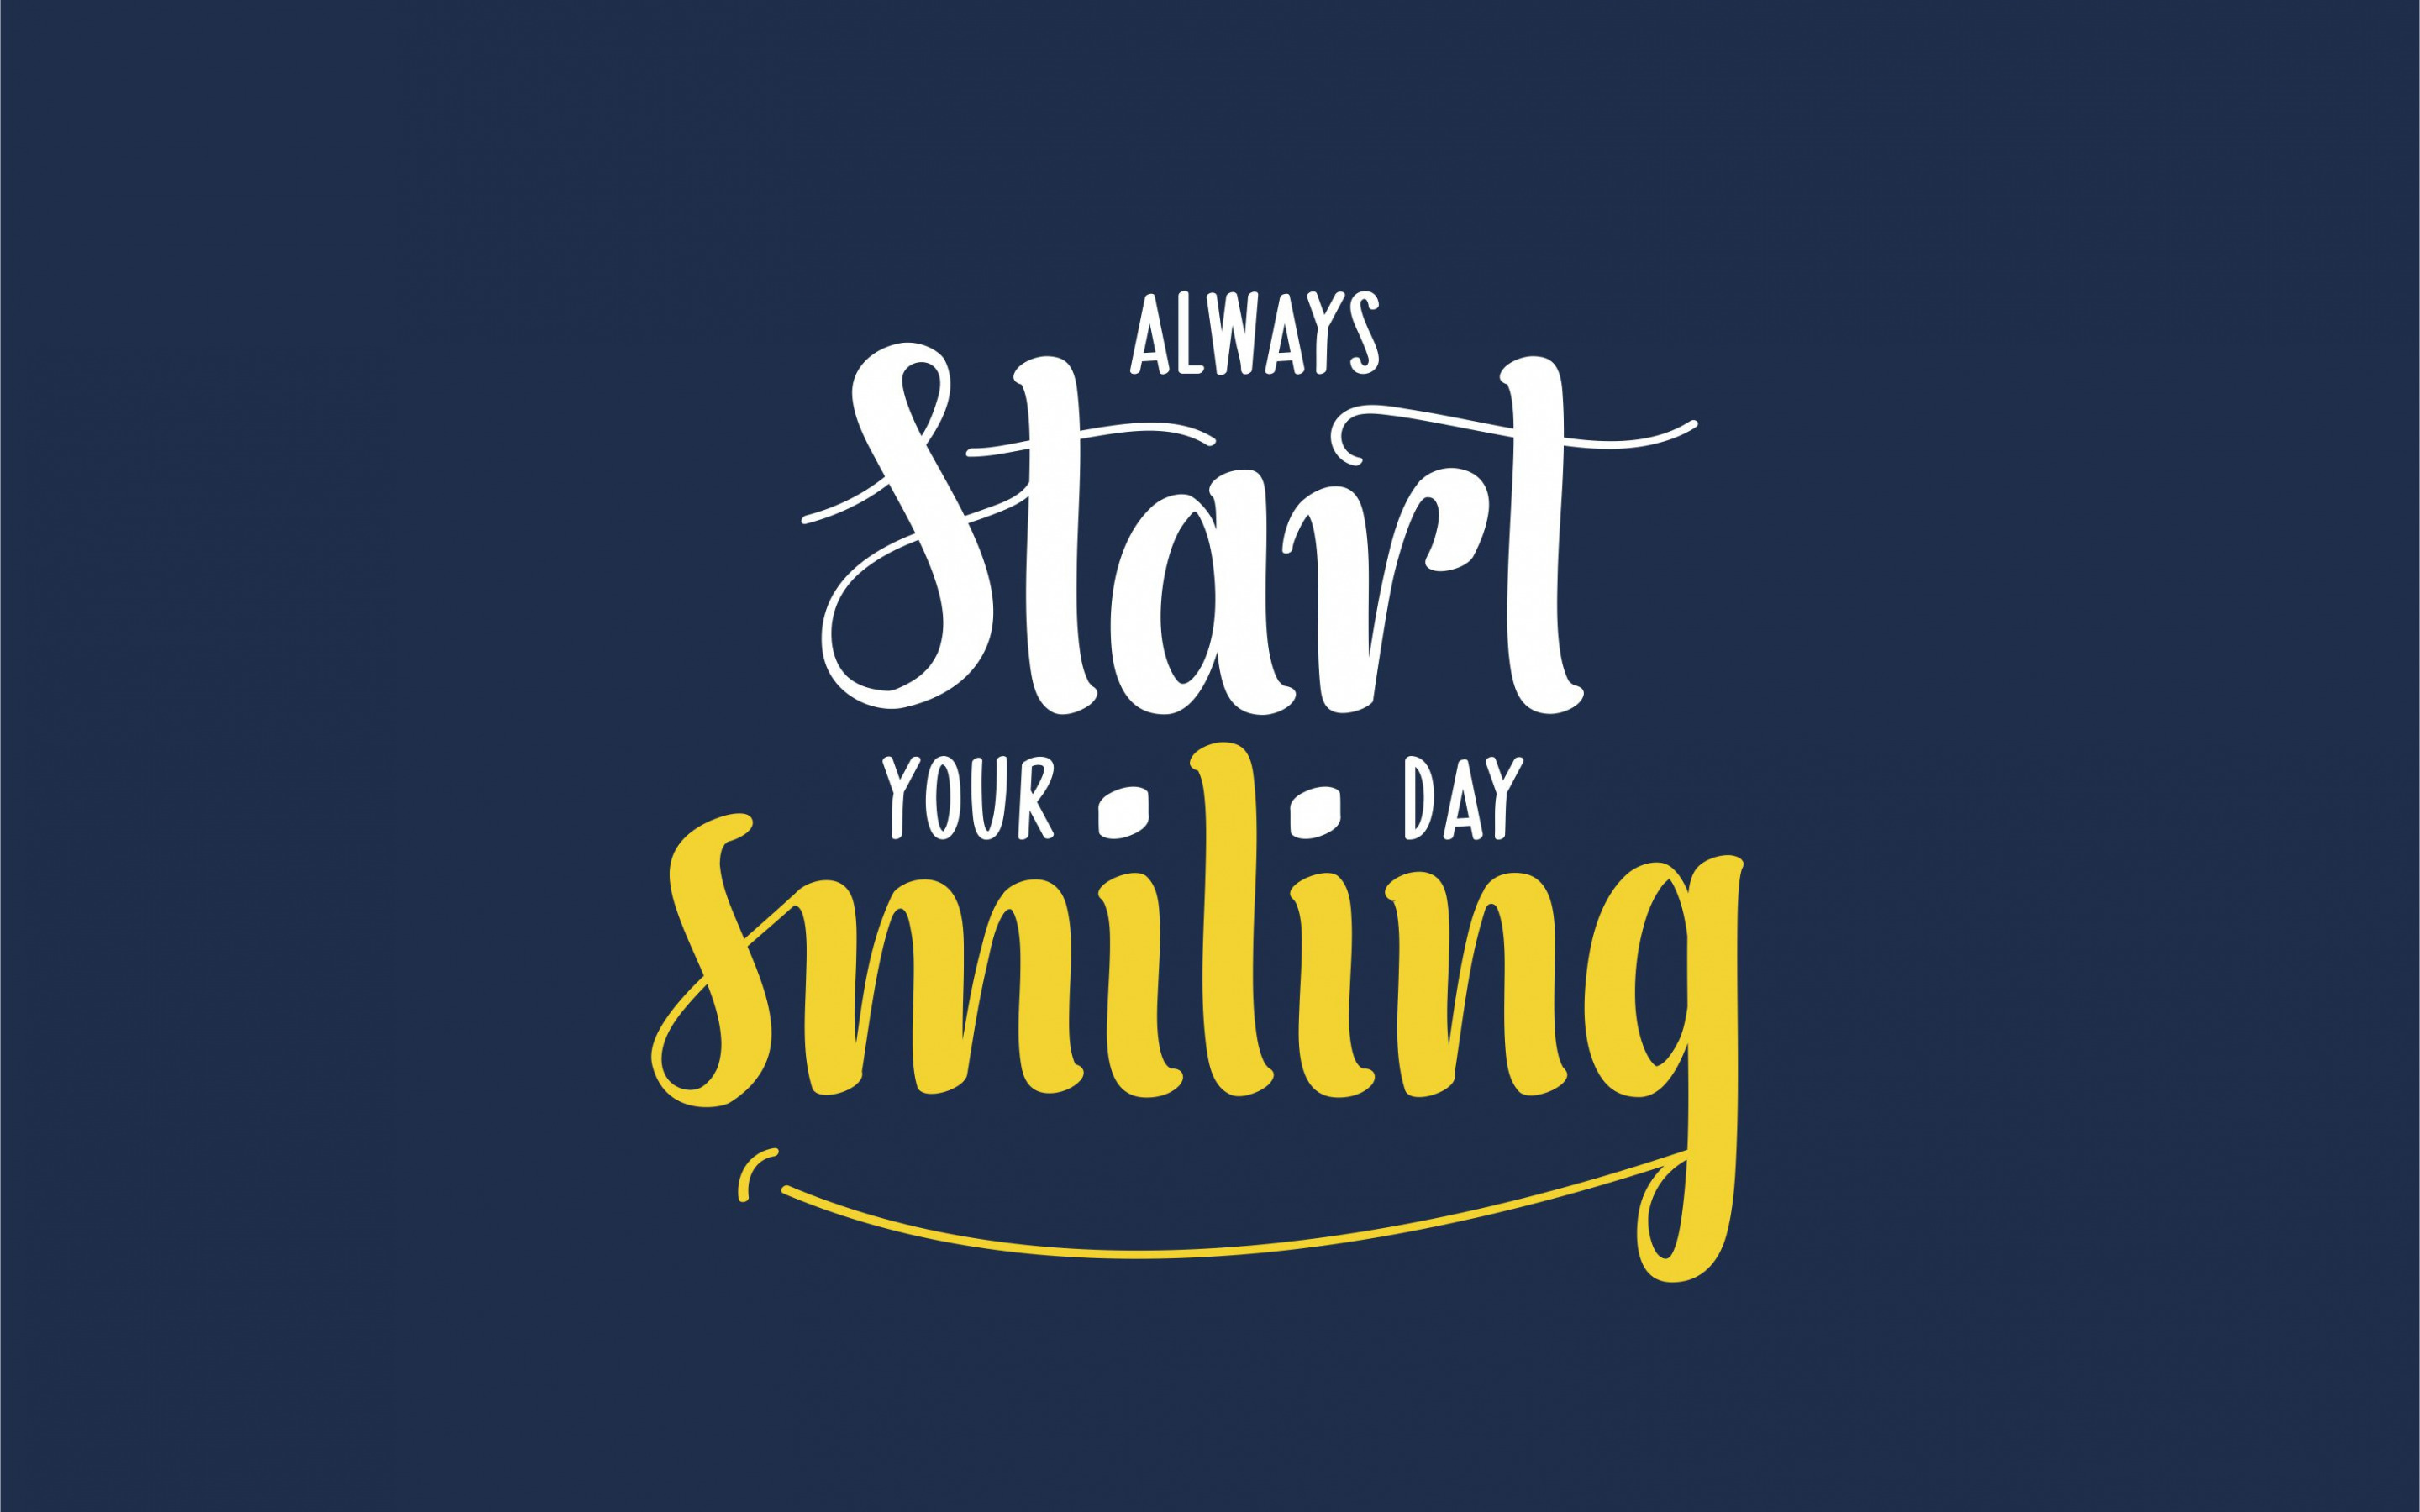 Always Start Your Day Smiling, Quotes About The Start - Calligraphy - HD Wallpaper 